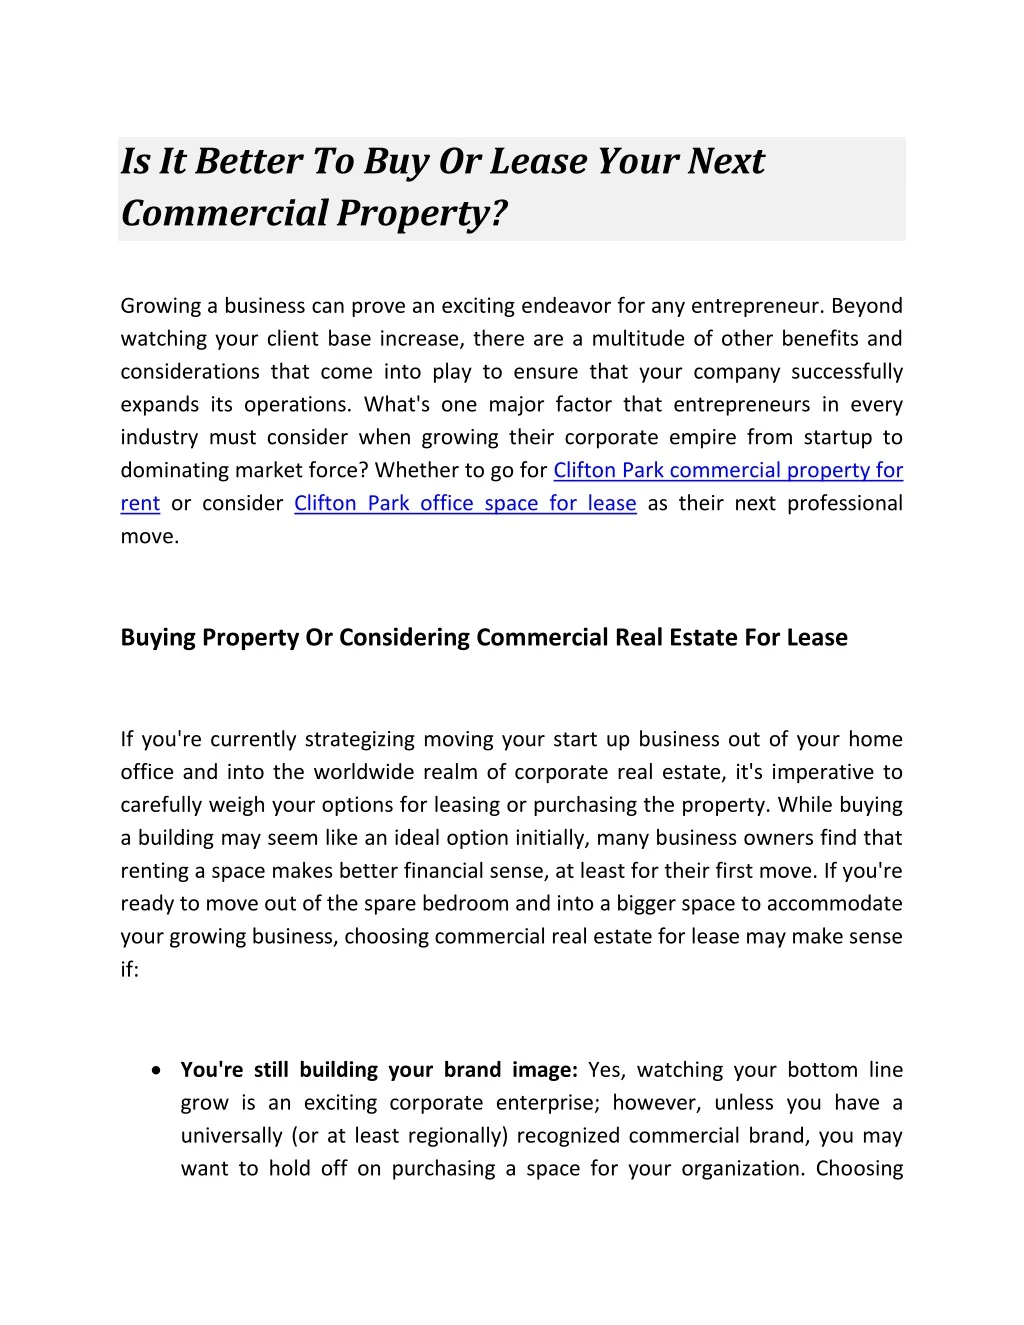 is it better to buy or lease your next commercial